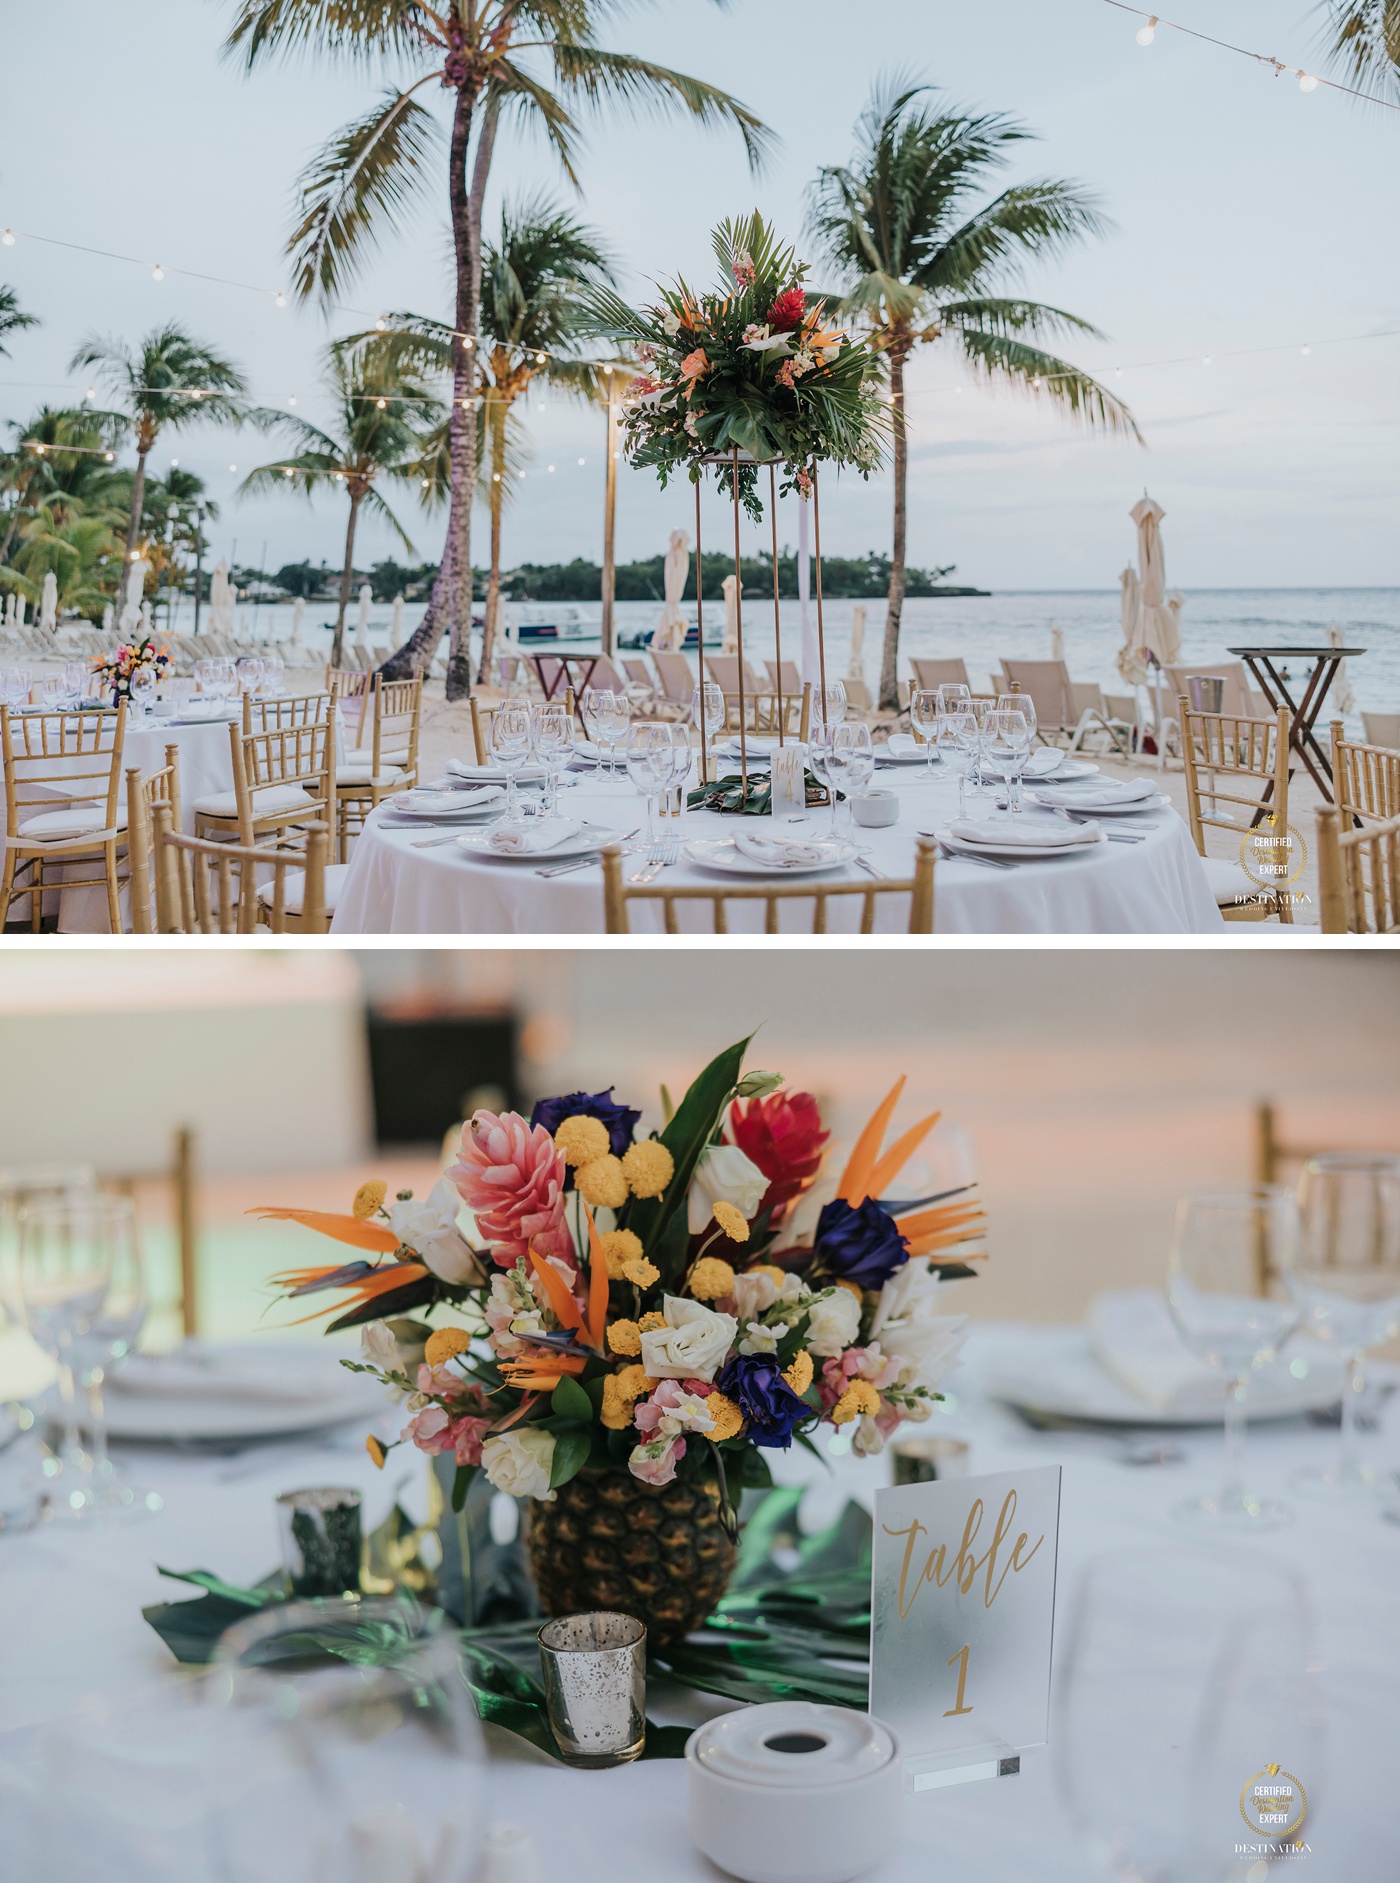 Pineapple centerpiece with tropical flowers at a destination wedding